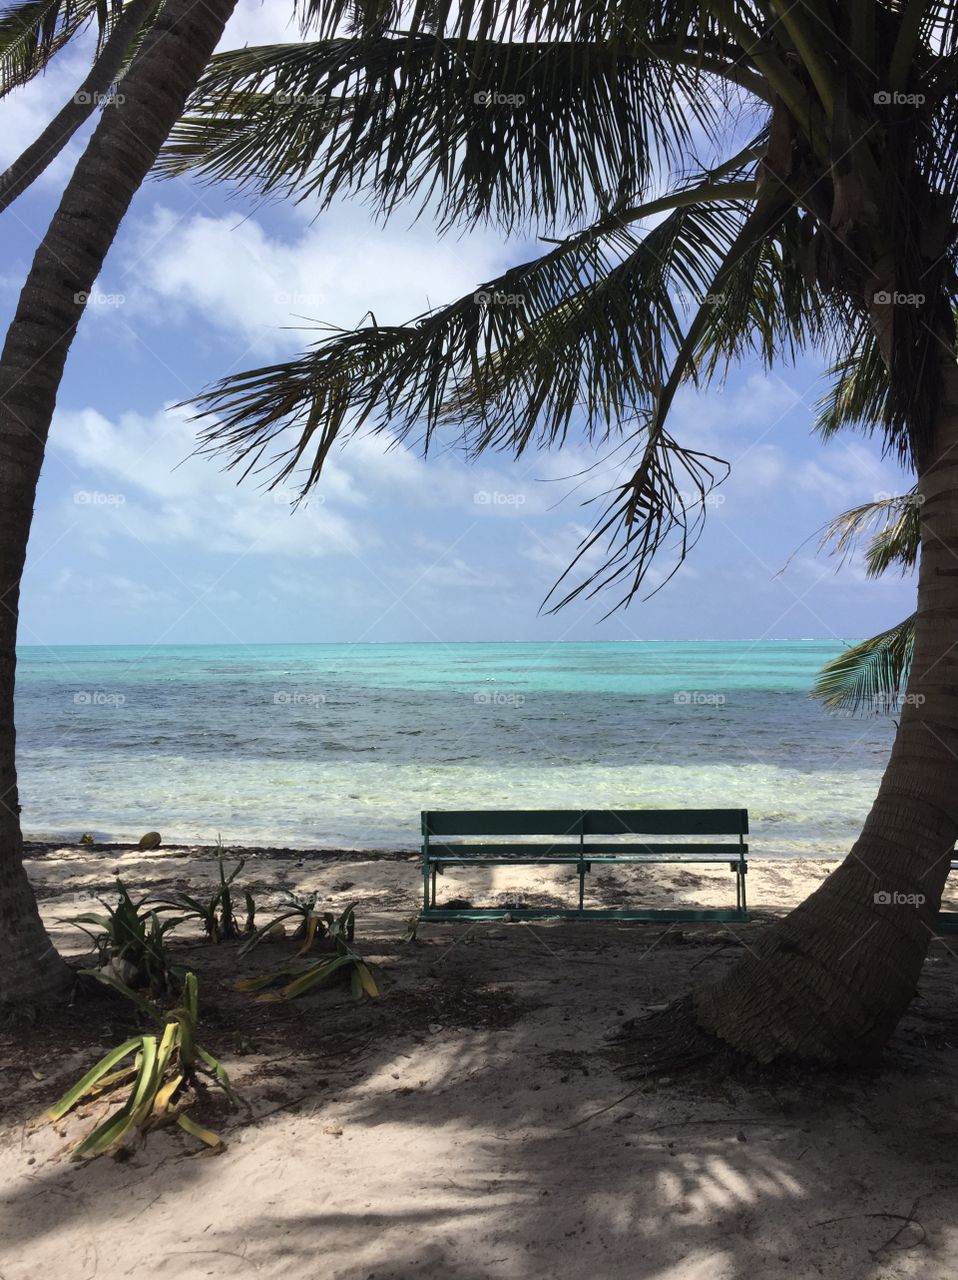 View of the coastline of Half Moon Caye, Belize. In the picture is a bench with palm trees curved around it.